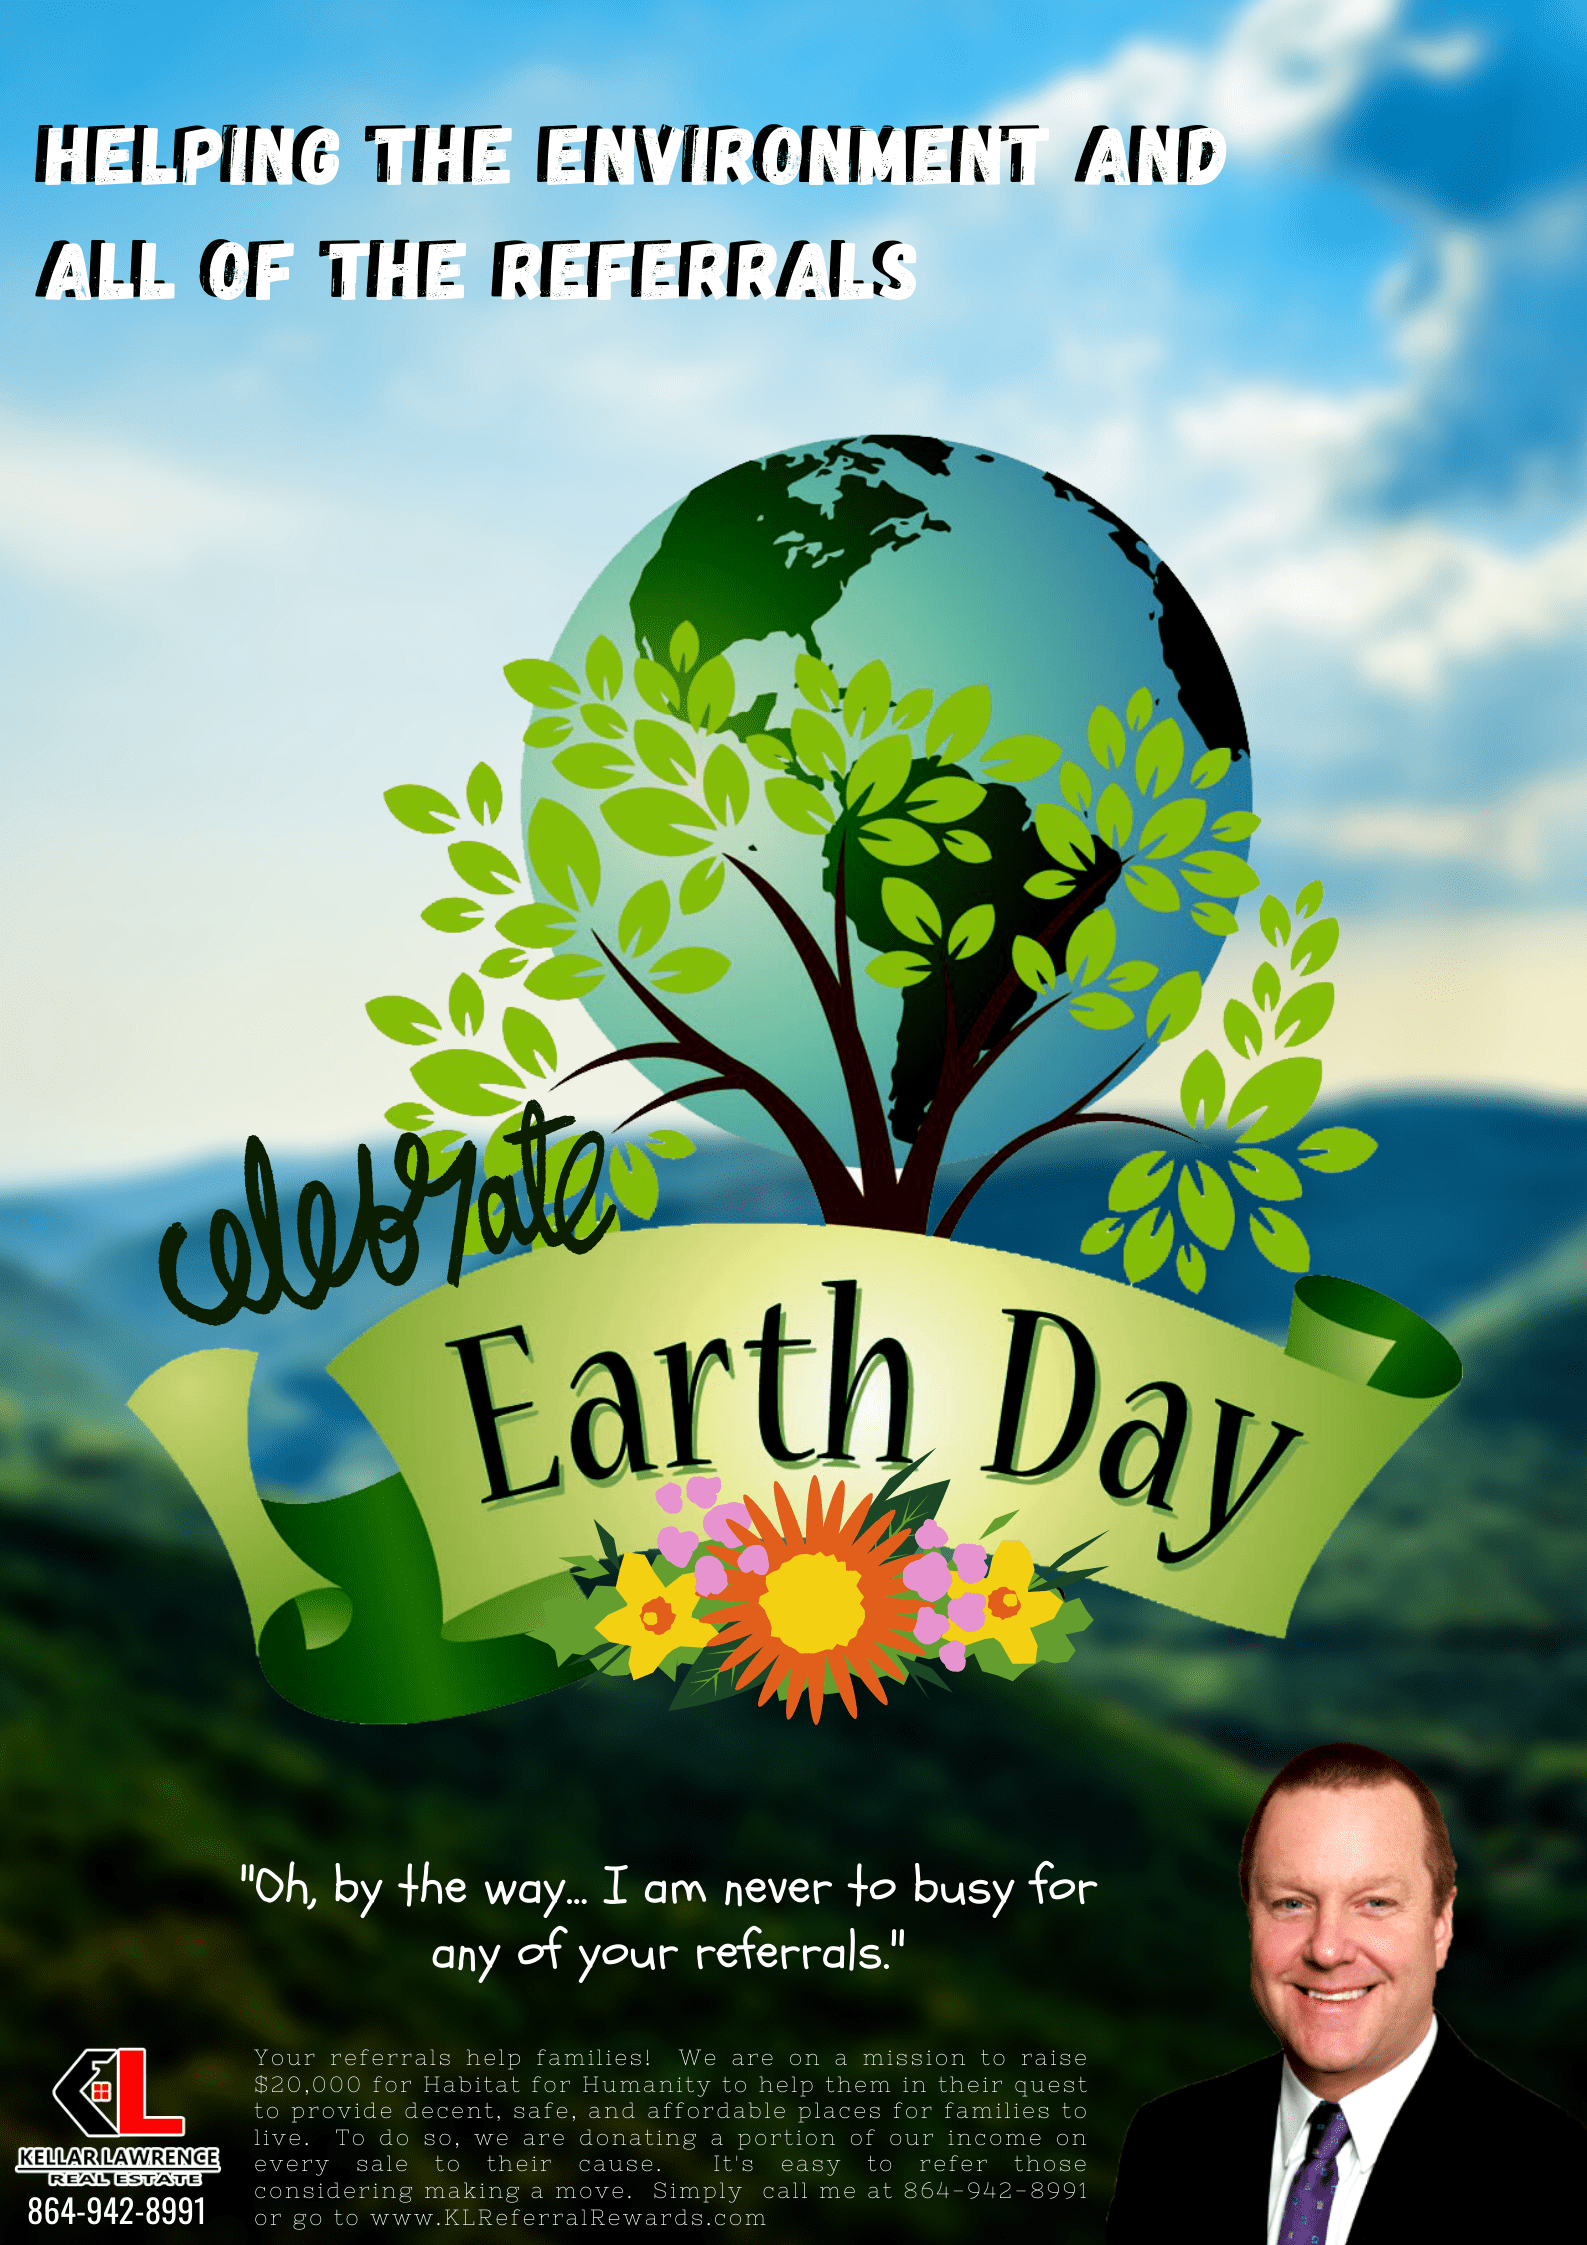 EARTH DAY APRIL 22, 2020! DO YOUR PART!